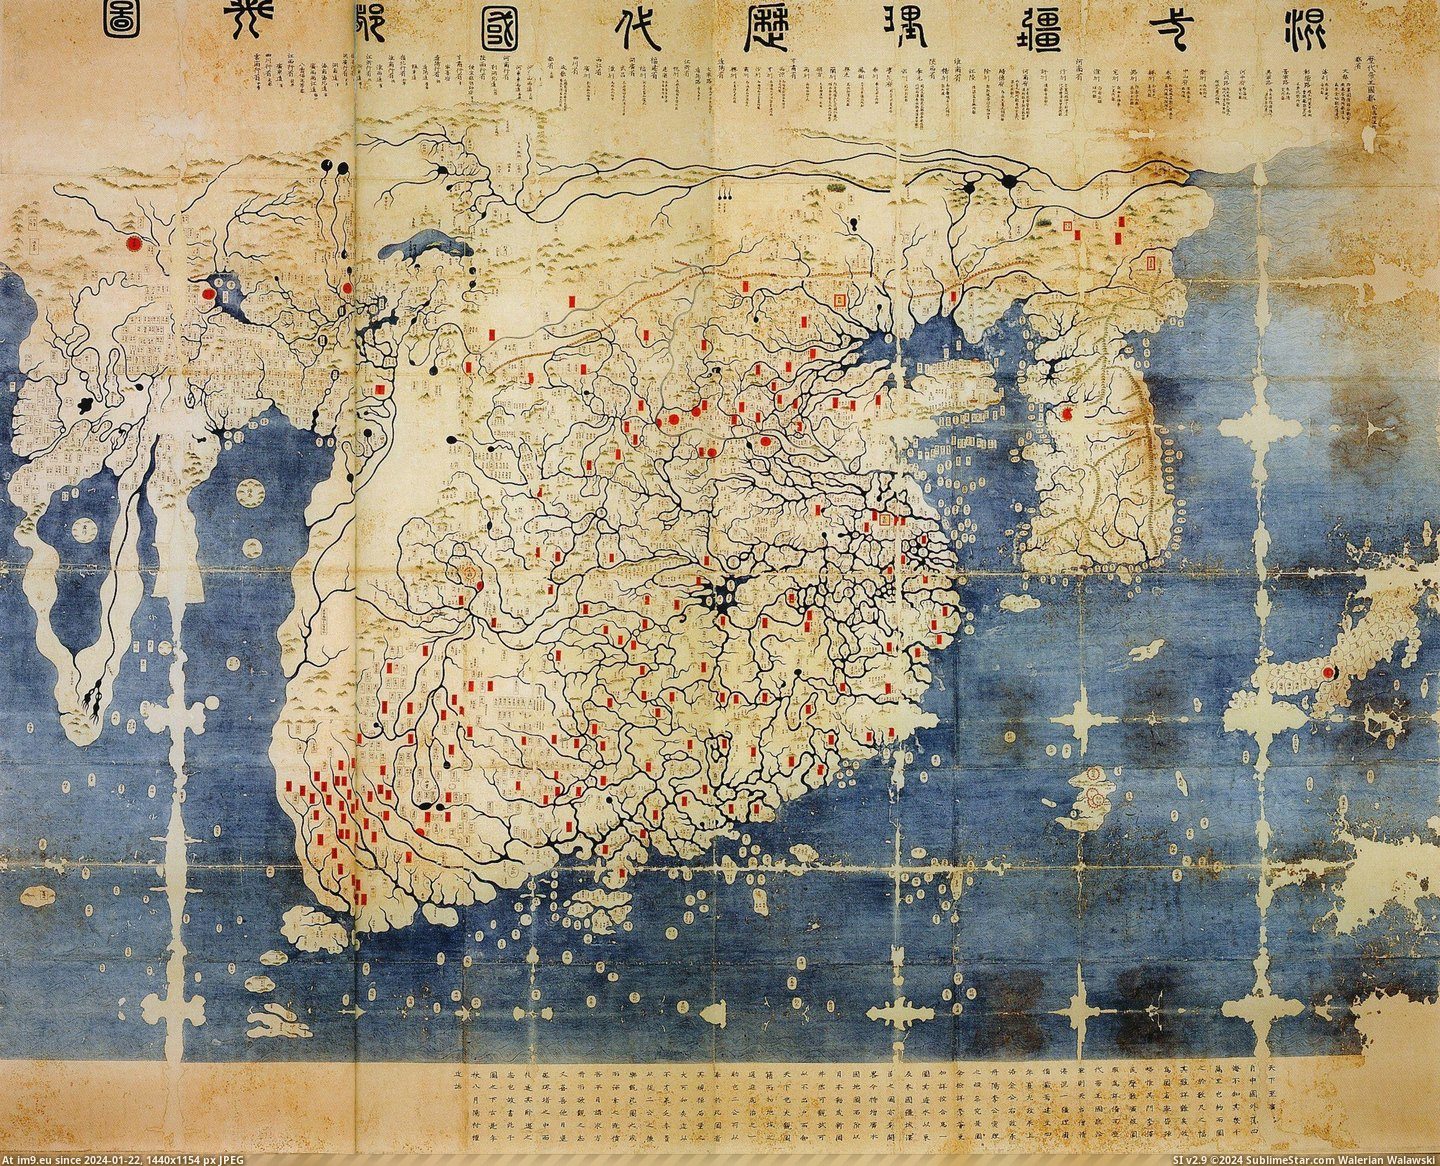 #World #Map #Temple #Alternate #15th #Korean #Century [Mapporn] Kangnido: An alternate version of the 15th century Korean map of the world, rediscovered in a Nagasaki temple in 1998. Pic. (Изображение из альбом My r/MAPS favs))